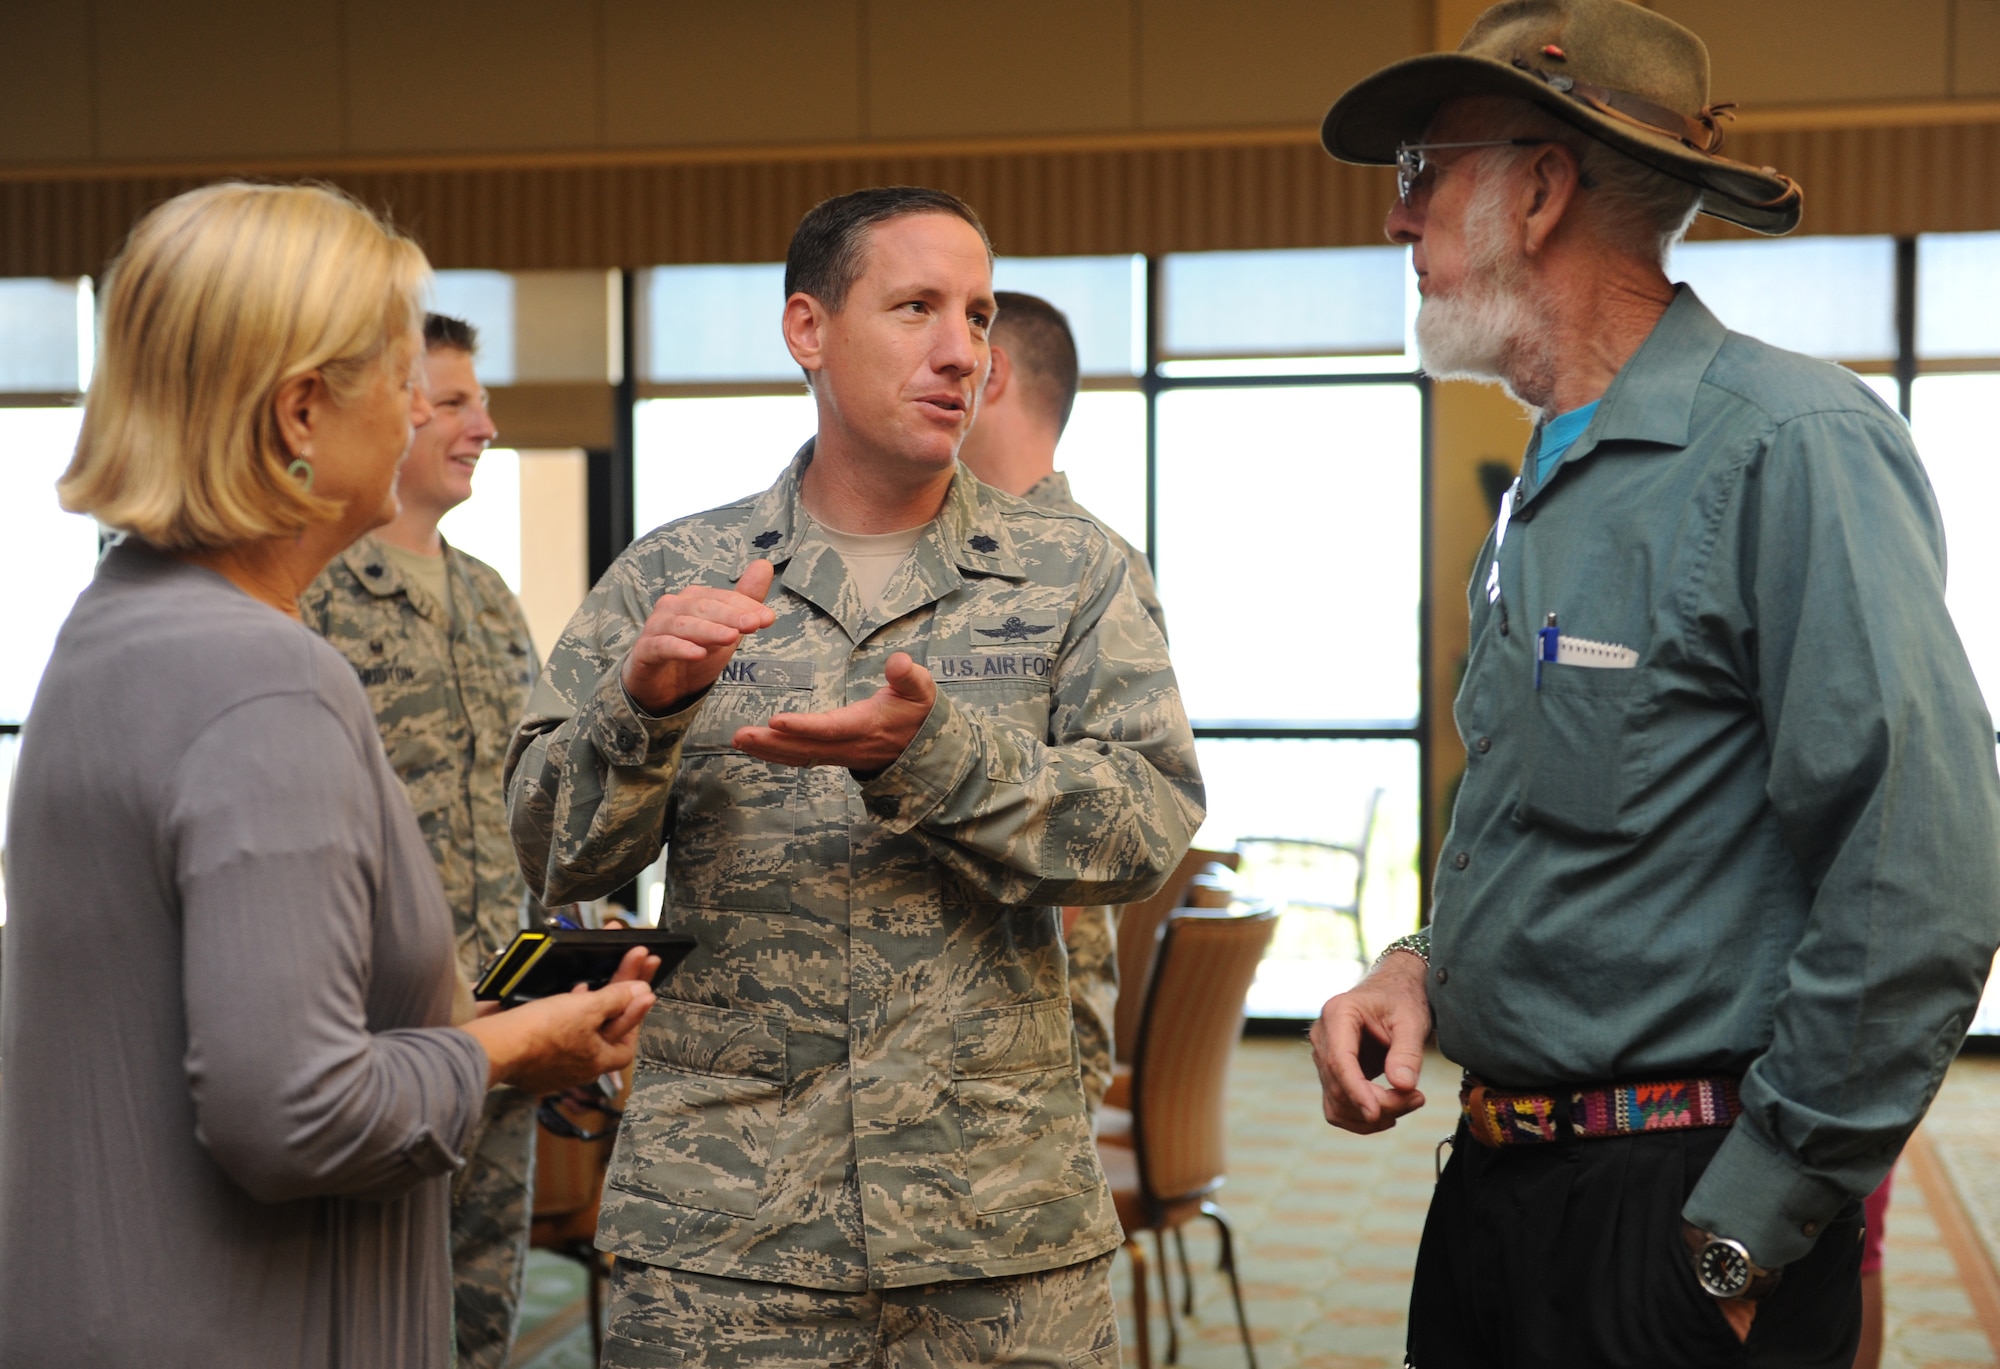 Lt. Col. Michael Zink, 338th Training Squadron commander, speaks with Diane Thompson and Louis Finkle, local business developers, during the quarterly Biloxi Chamber of Commerce Morning Call at the Bay Breeze Event Center Oct. 13, 2016, on Keesler Air Force Base, Miss. Local business and community leaders attended the event to learn more about the base’s mission and its Airmen. During the event, several 81st Training Group Airmen also shared their story about why they joined the Air Force. (U.S. Air Force photo by Kemberly Groue/Released)